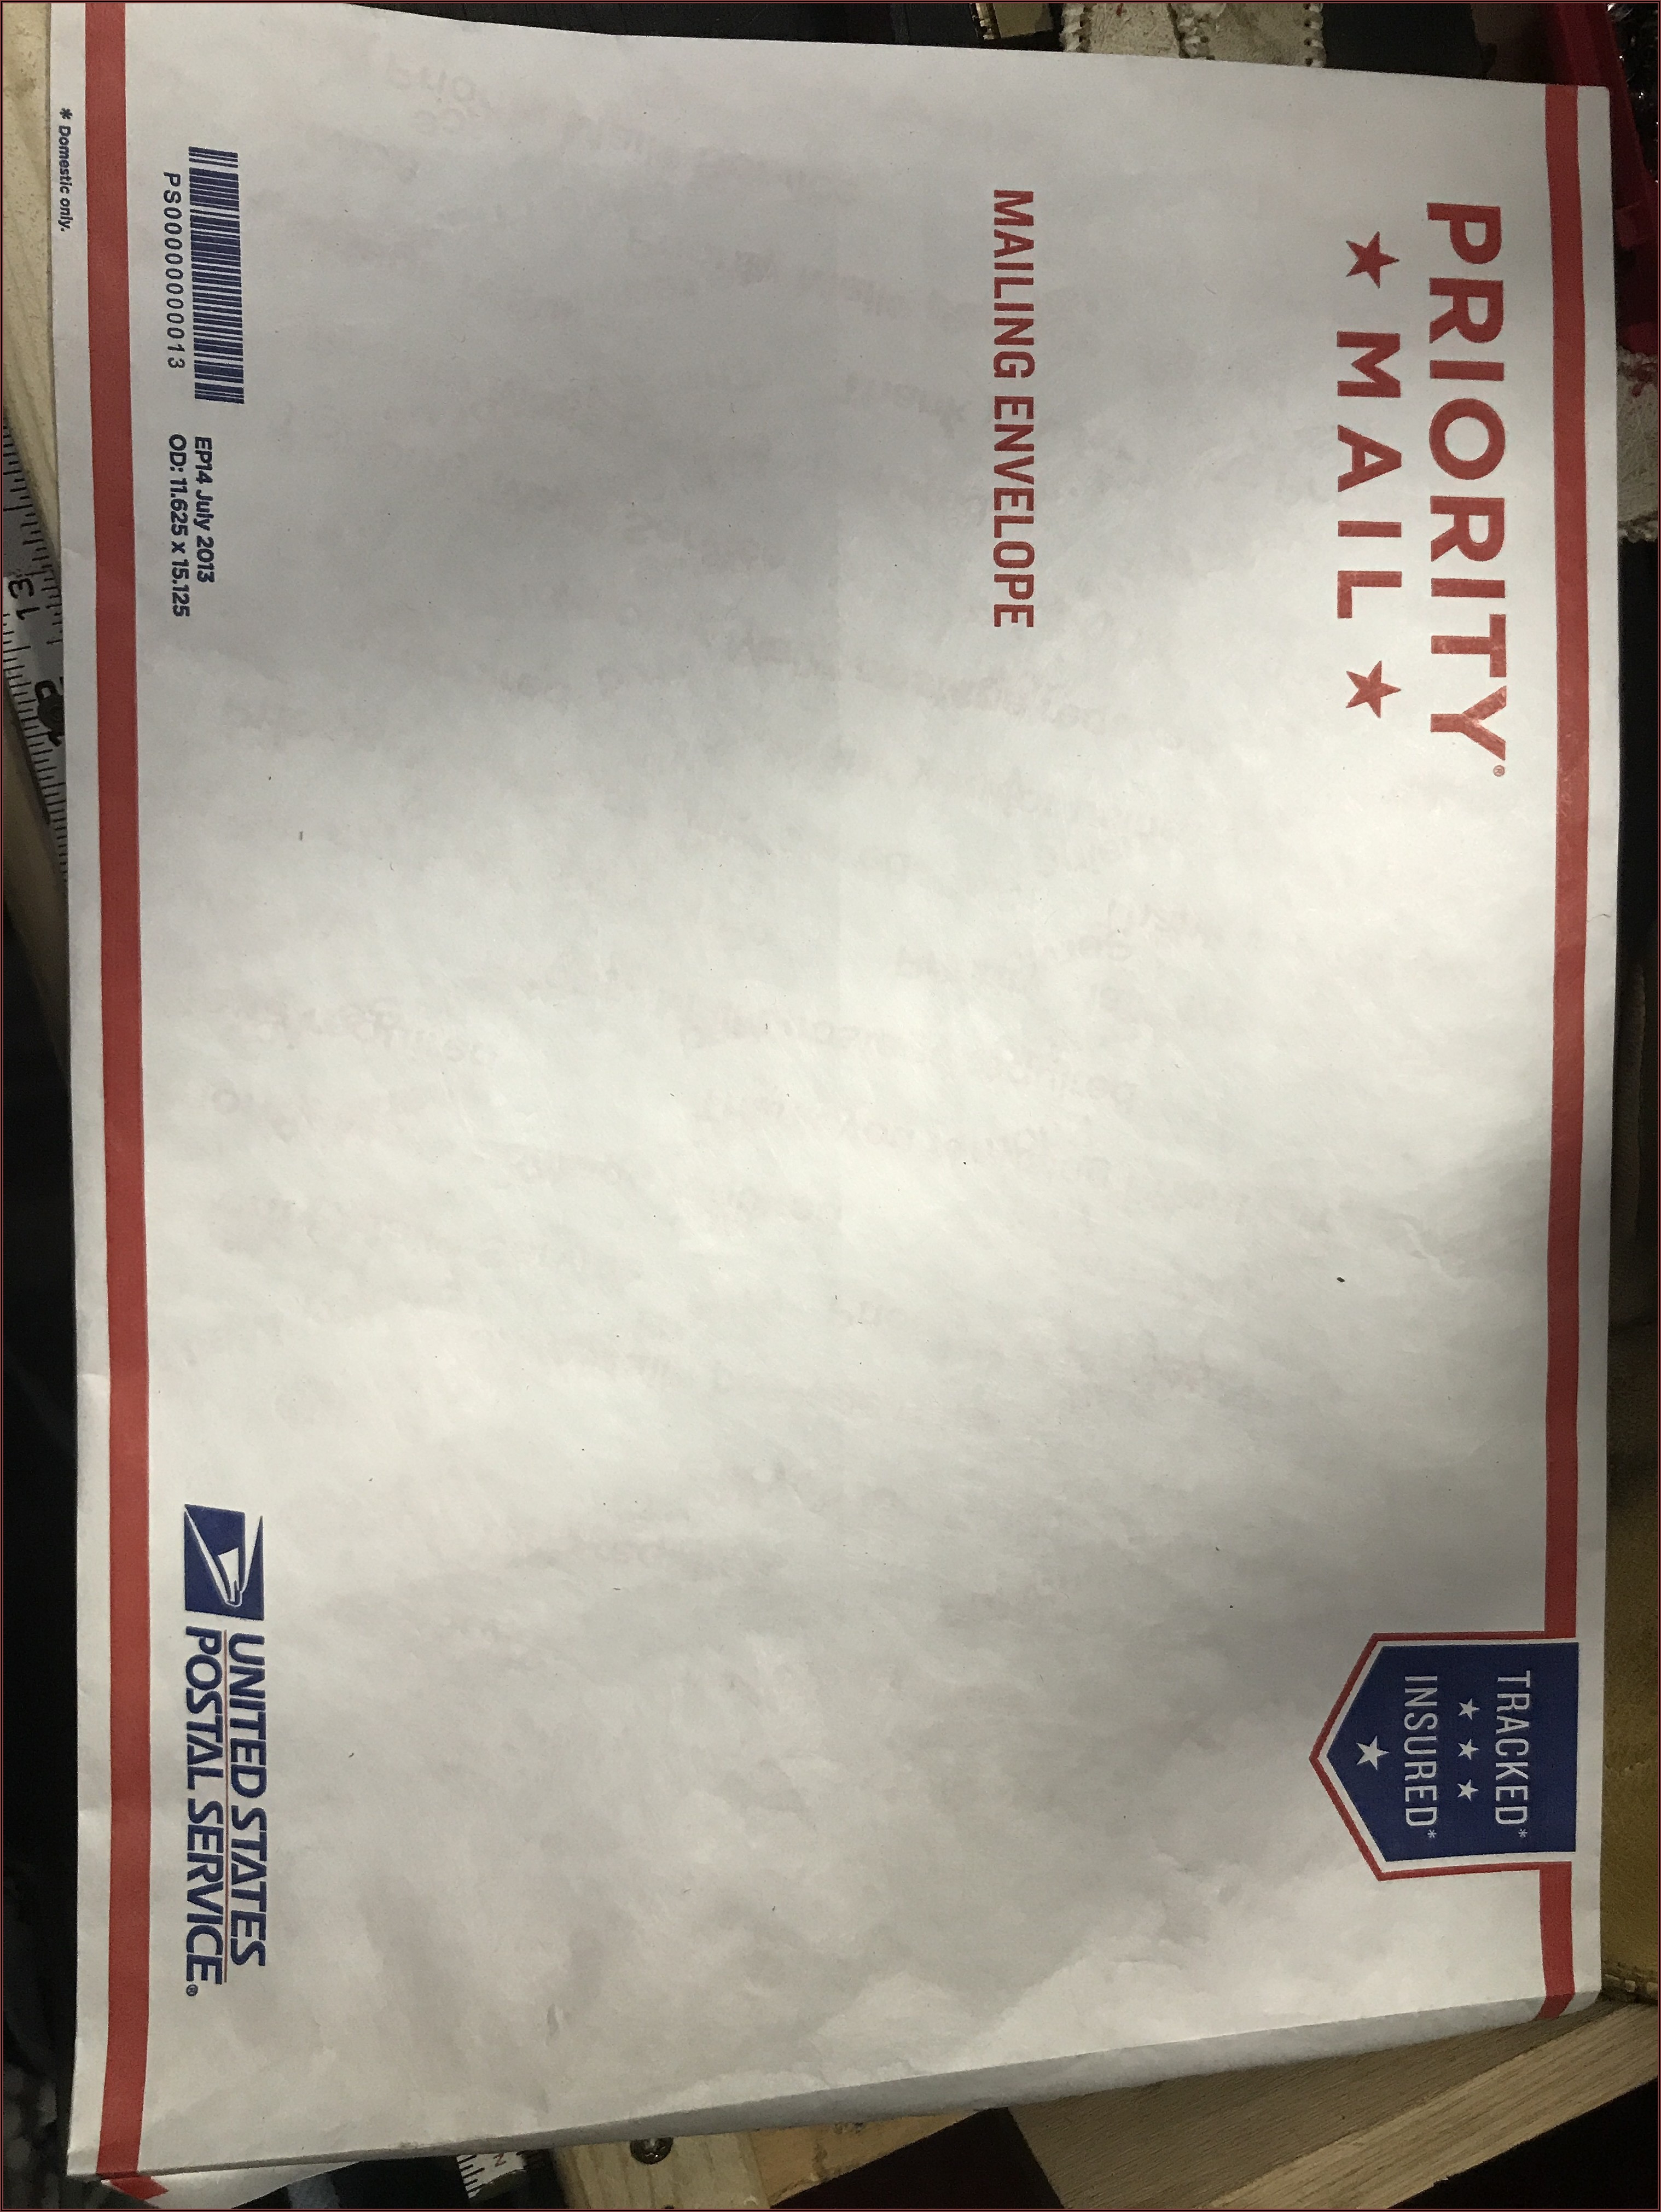 Usps Priority Mail Envelope Rules